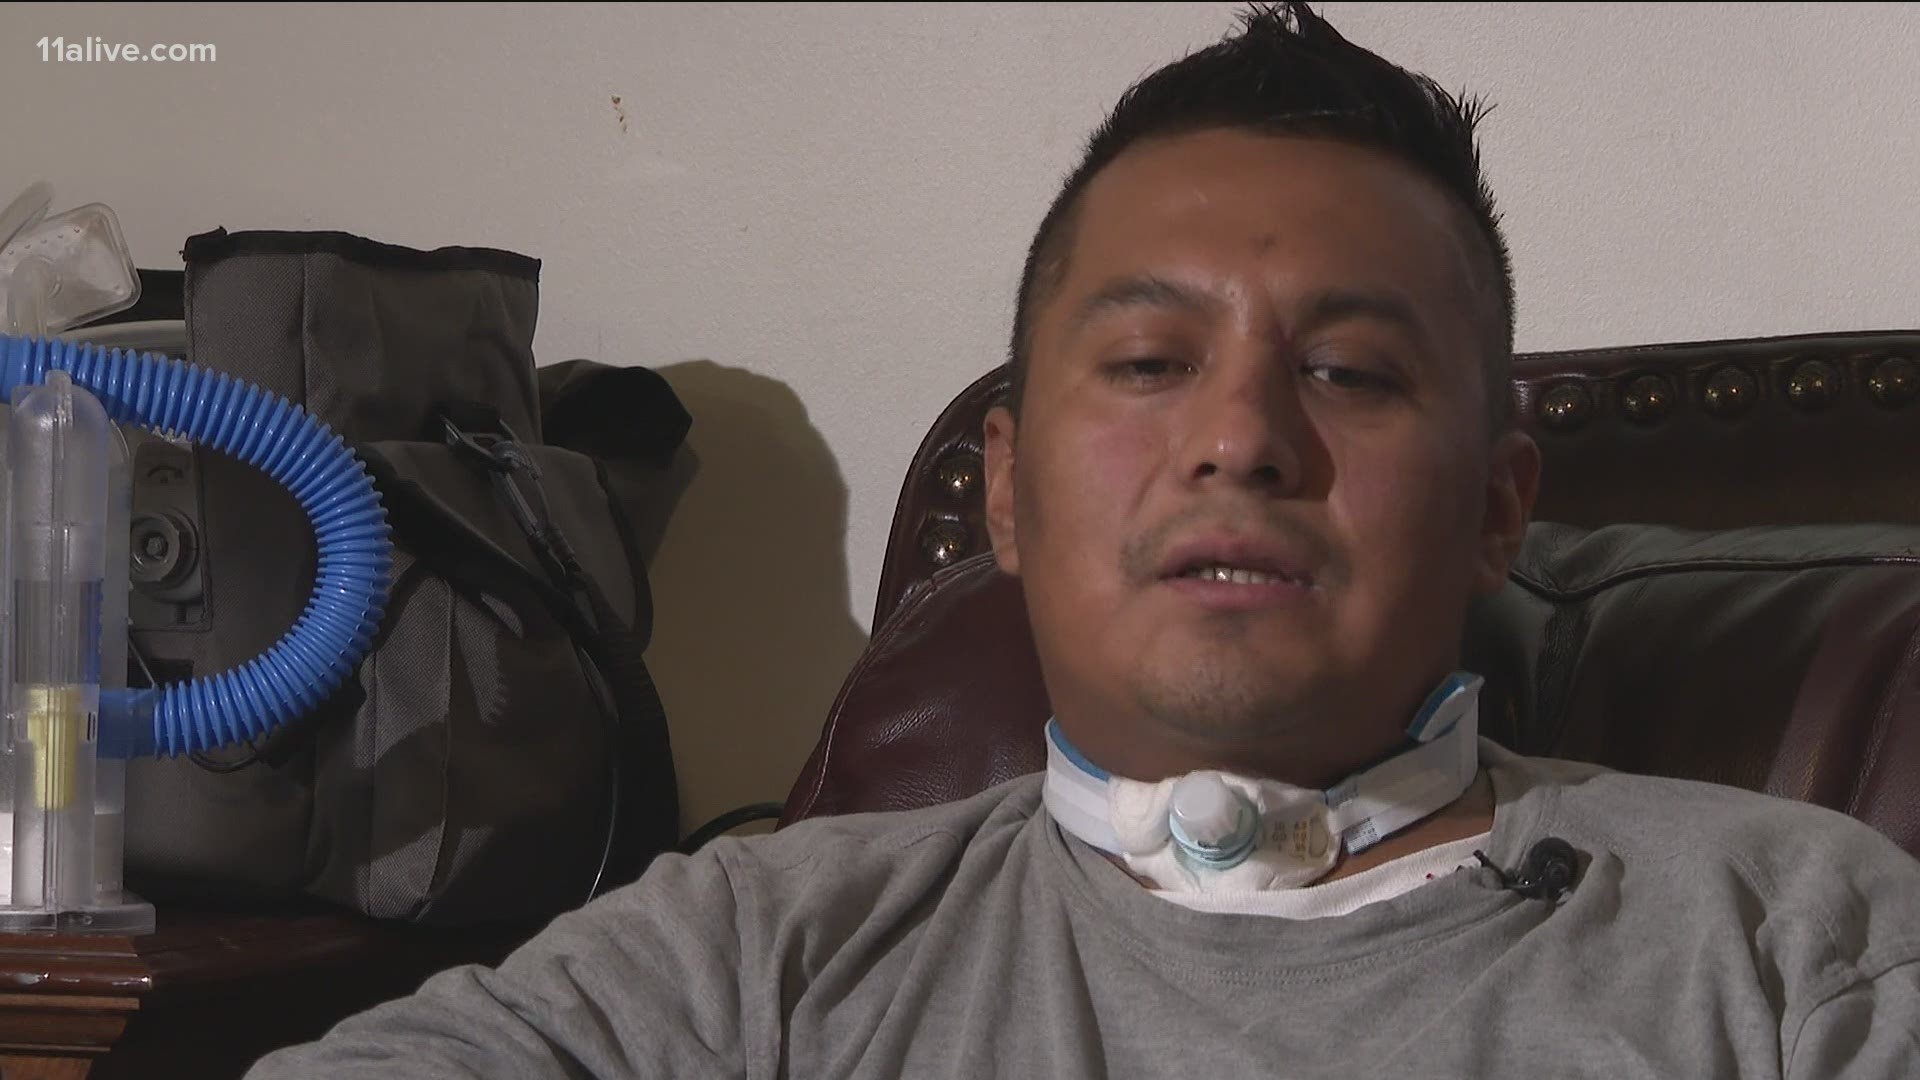 After nearly one month in the hospital, Elcias Hernandez-Ortiz is finally back home and sharing his story after he was shot on March 16.